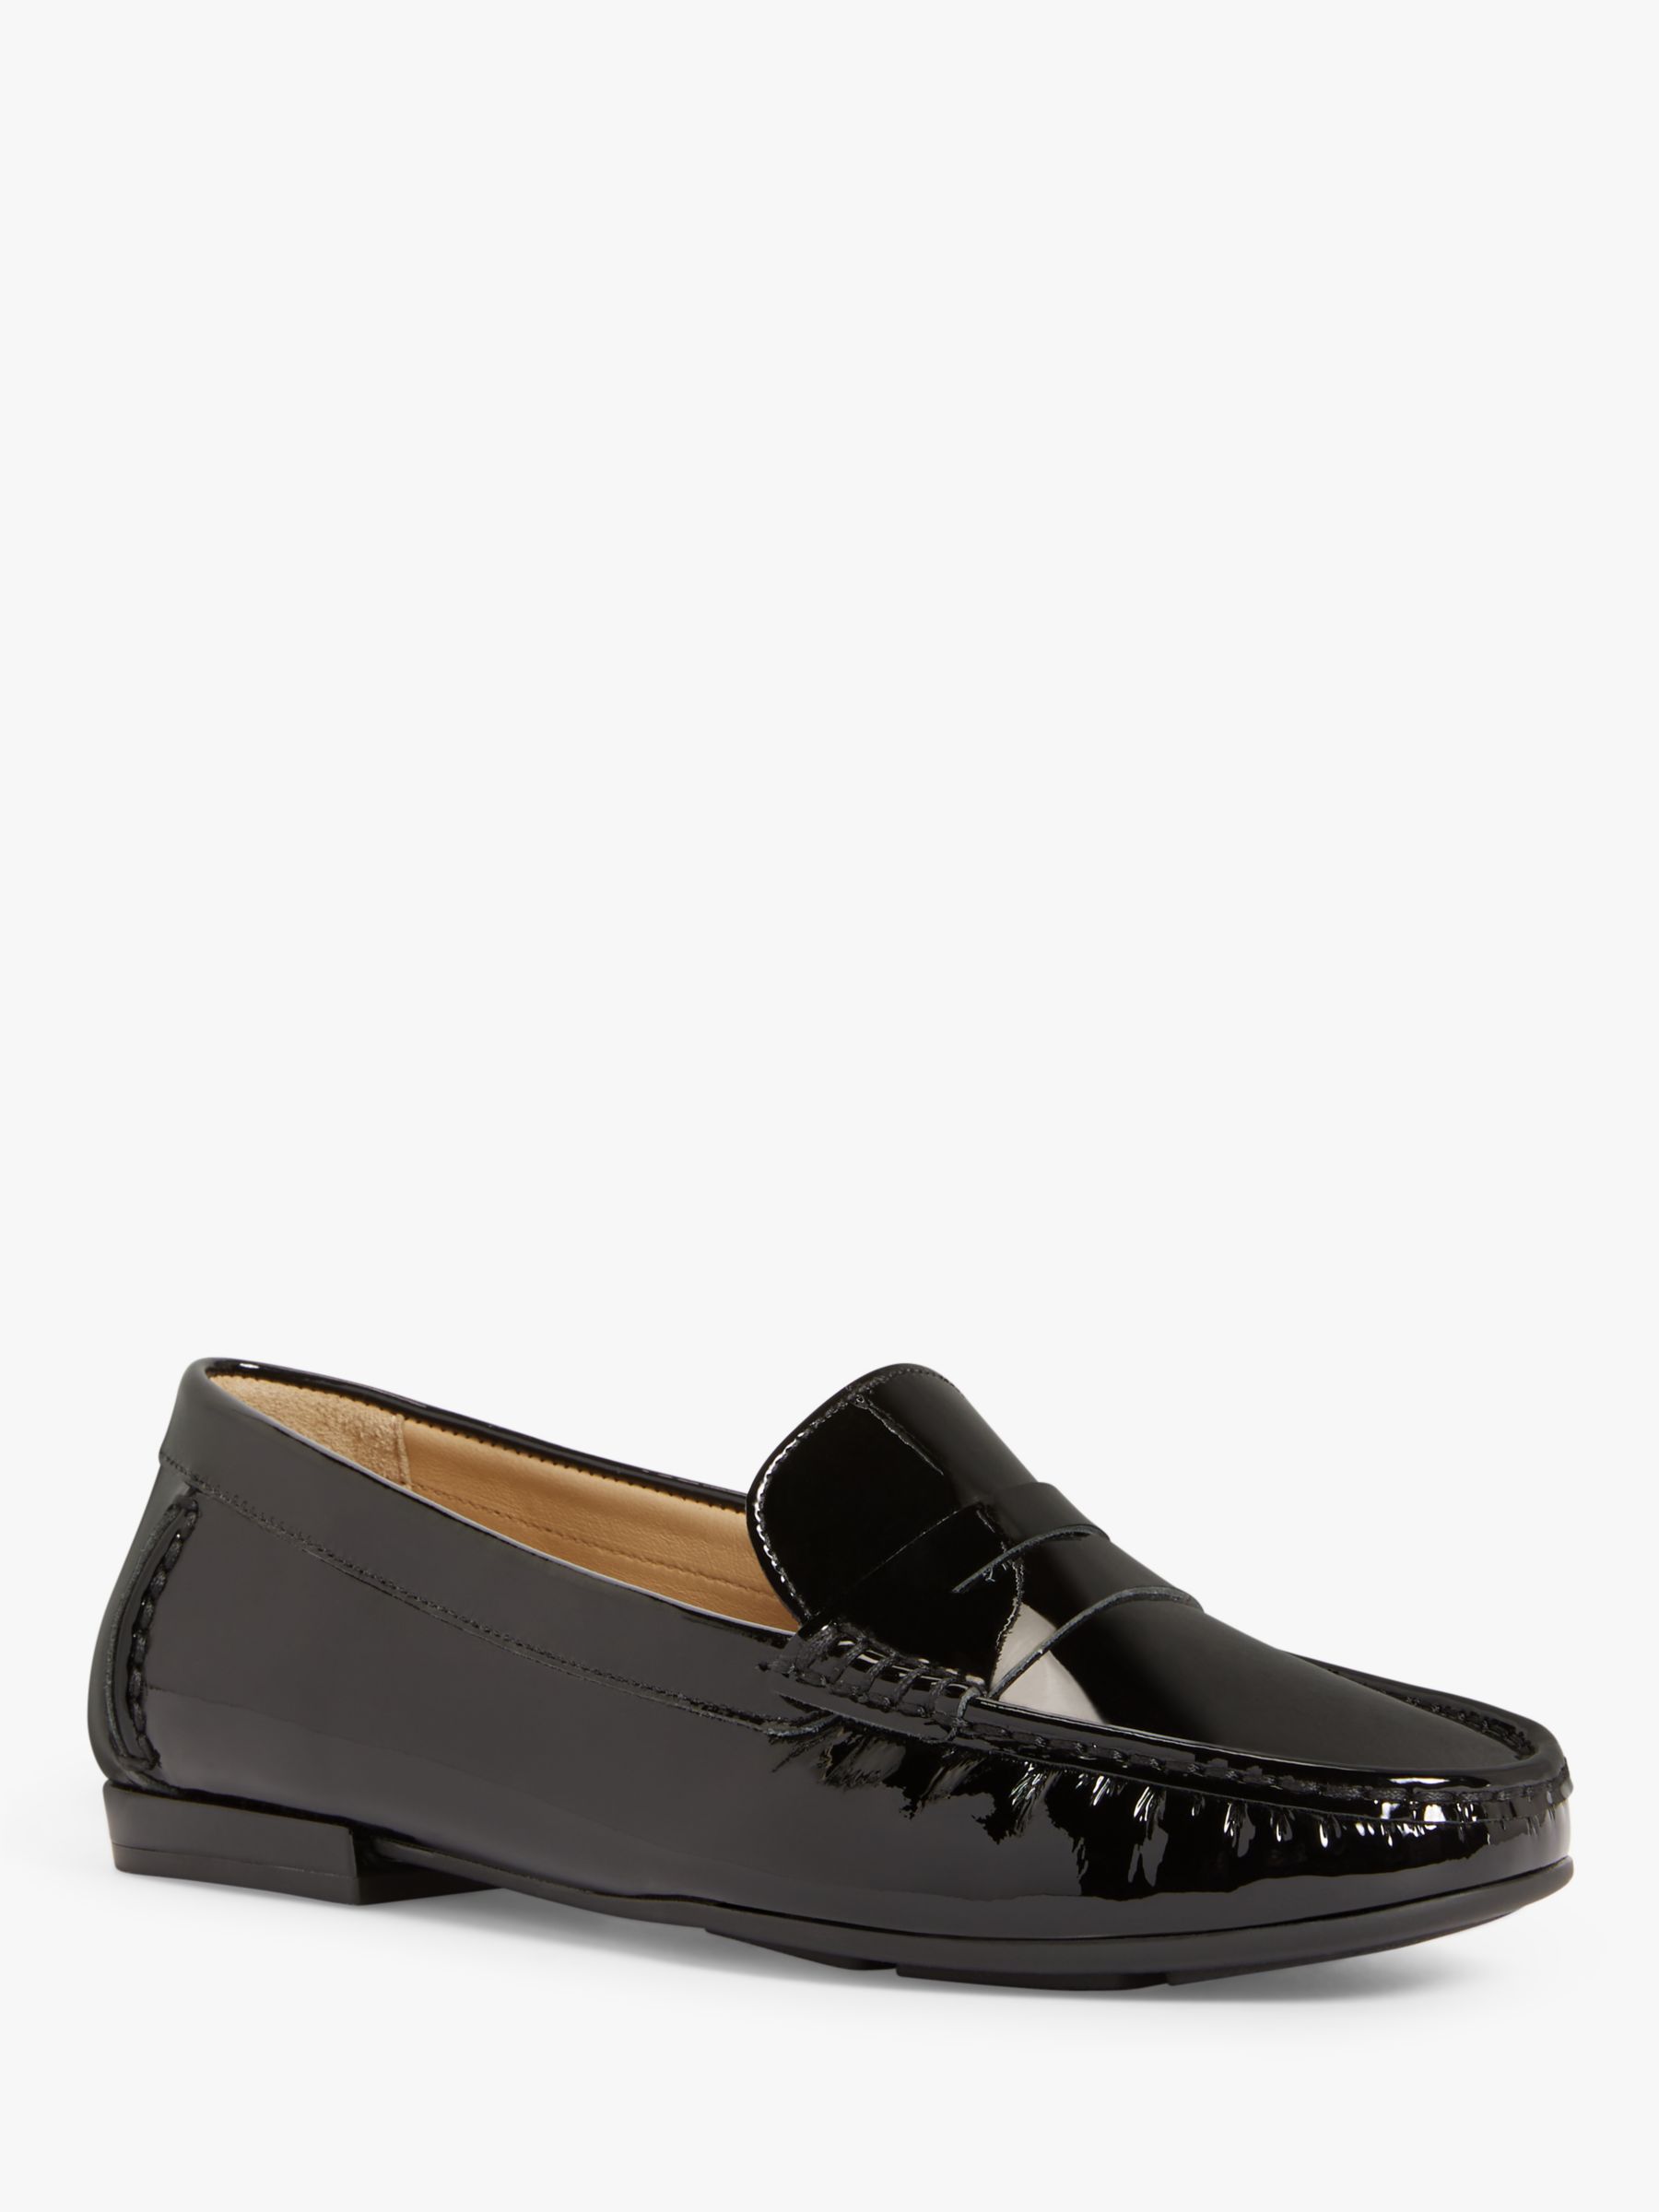 John Lewis Wide Fit Penny Patent Leather Moccasins, Black, 3